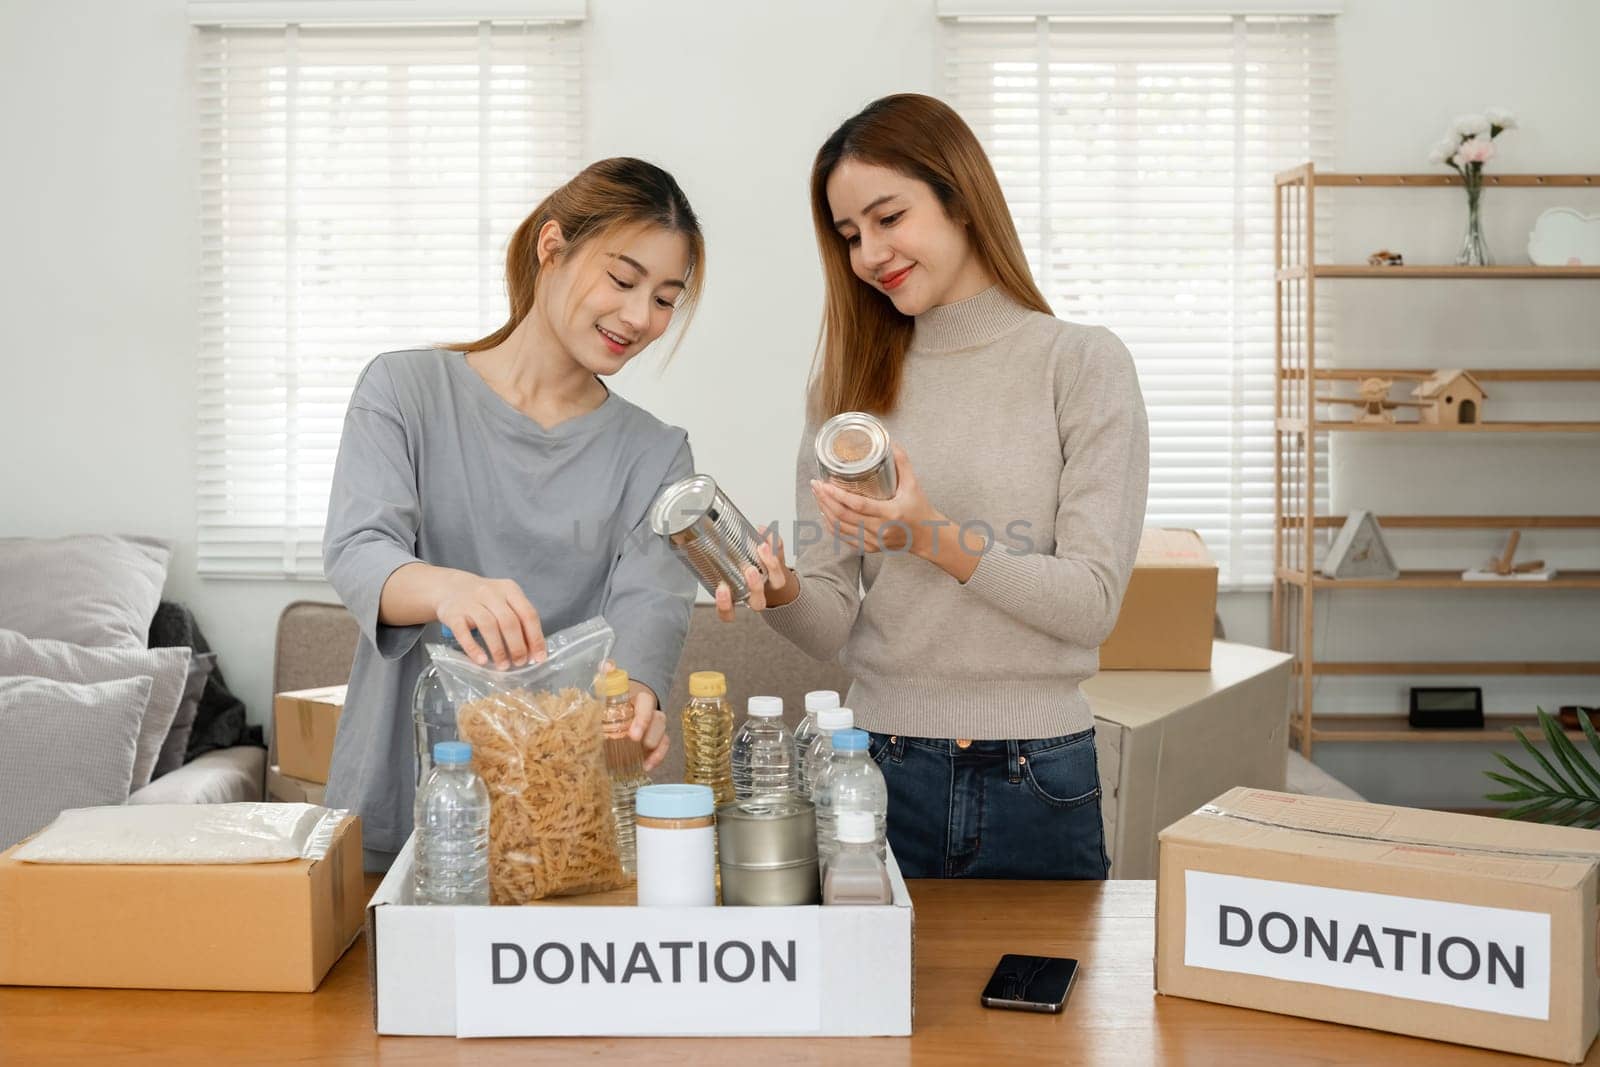 Two young female volunteers help pack food into donation boxes and prepare to donate them to charity by wichayada